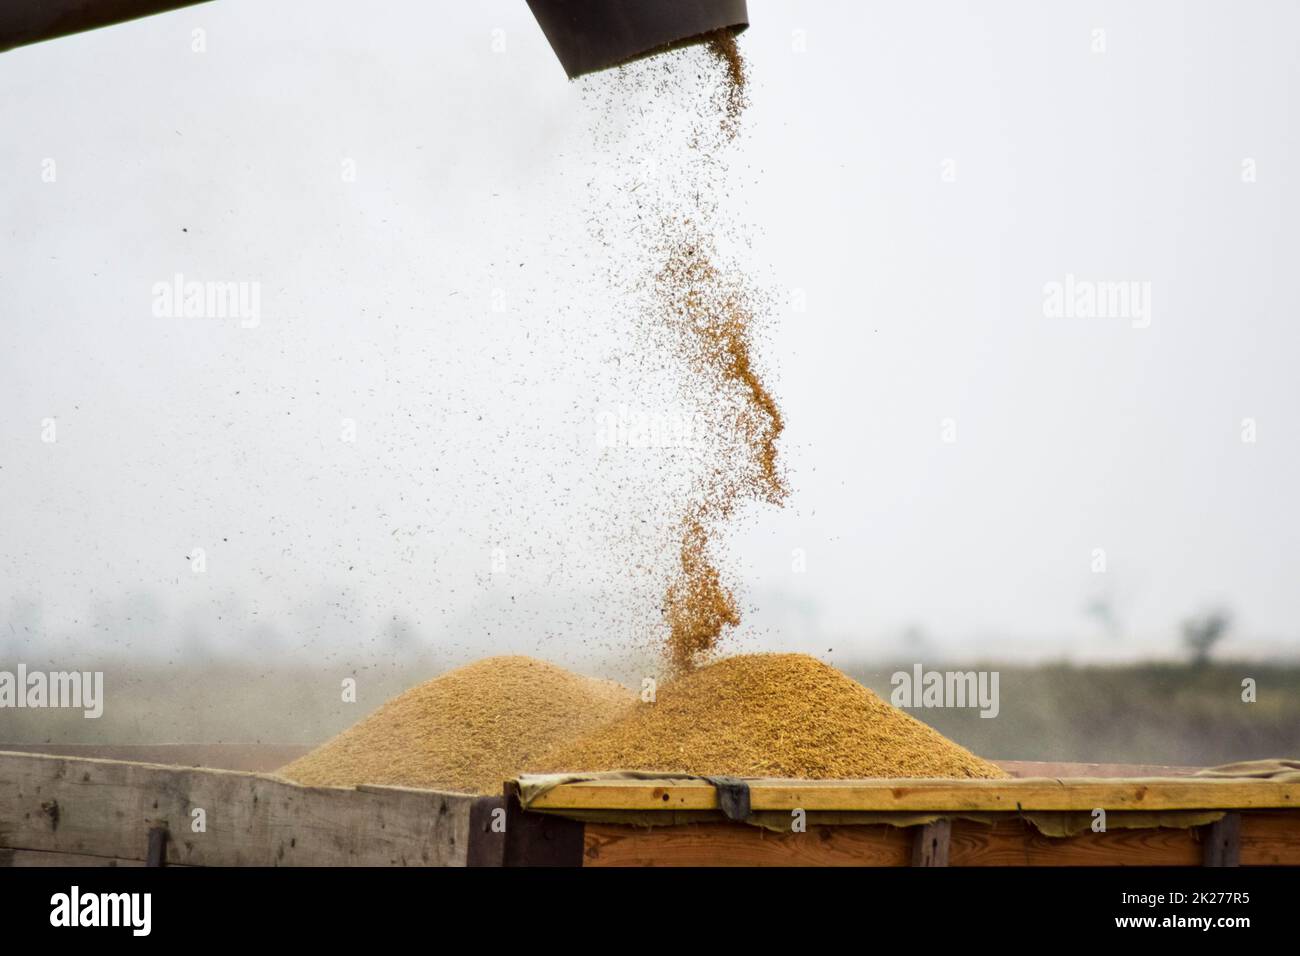 Unloading screw a combine harvester. Unloading grain from a combine harvester into a truck body Stock Photo